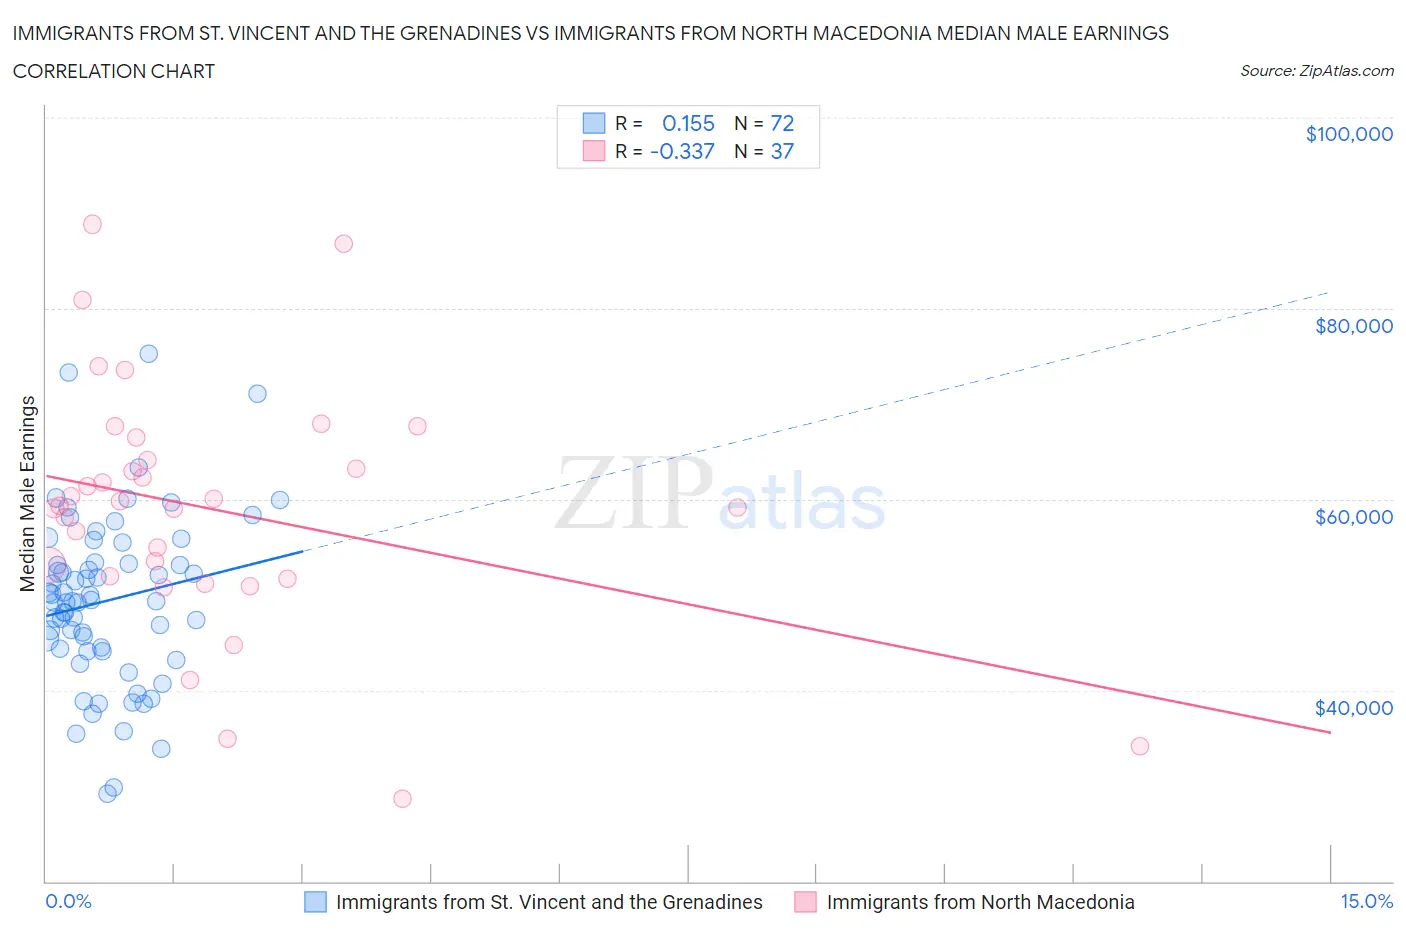 Immigrants from St. Vincent and the Grenadines vs Immigrants from North Macedonia Median Male Earnings